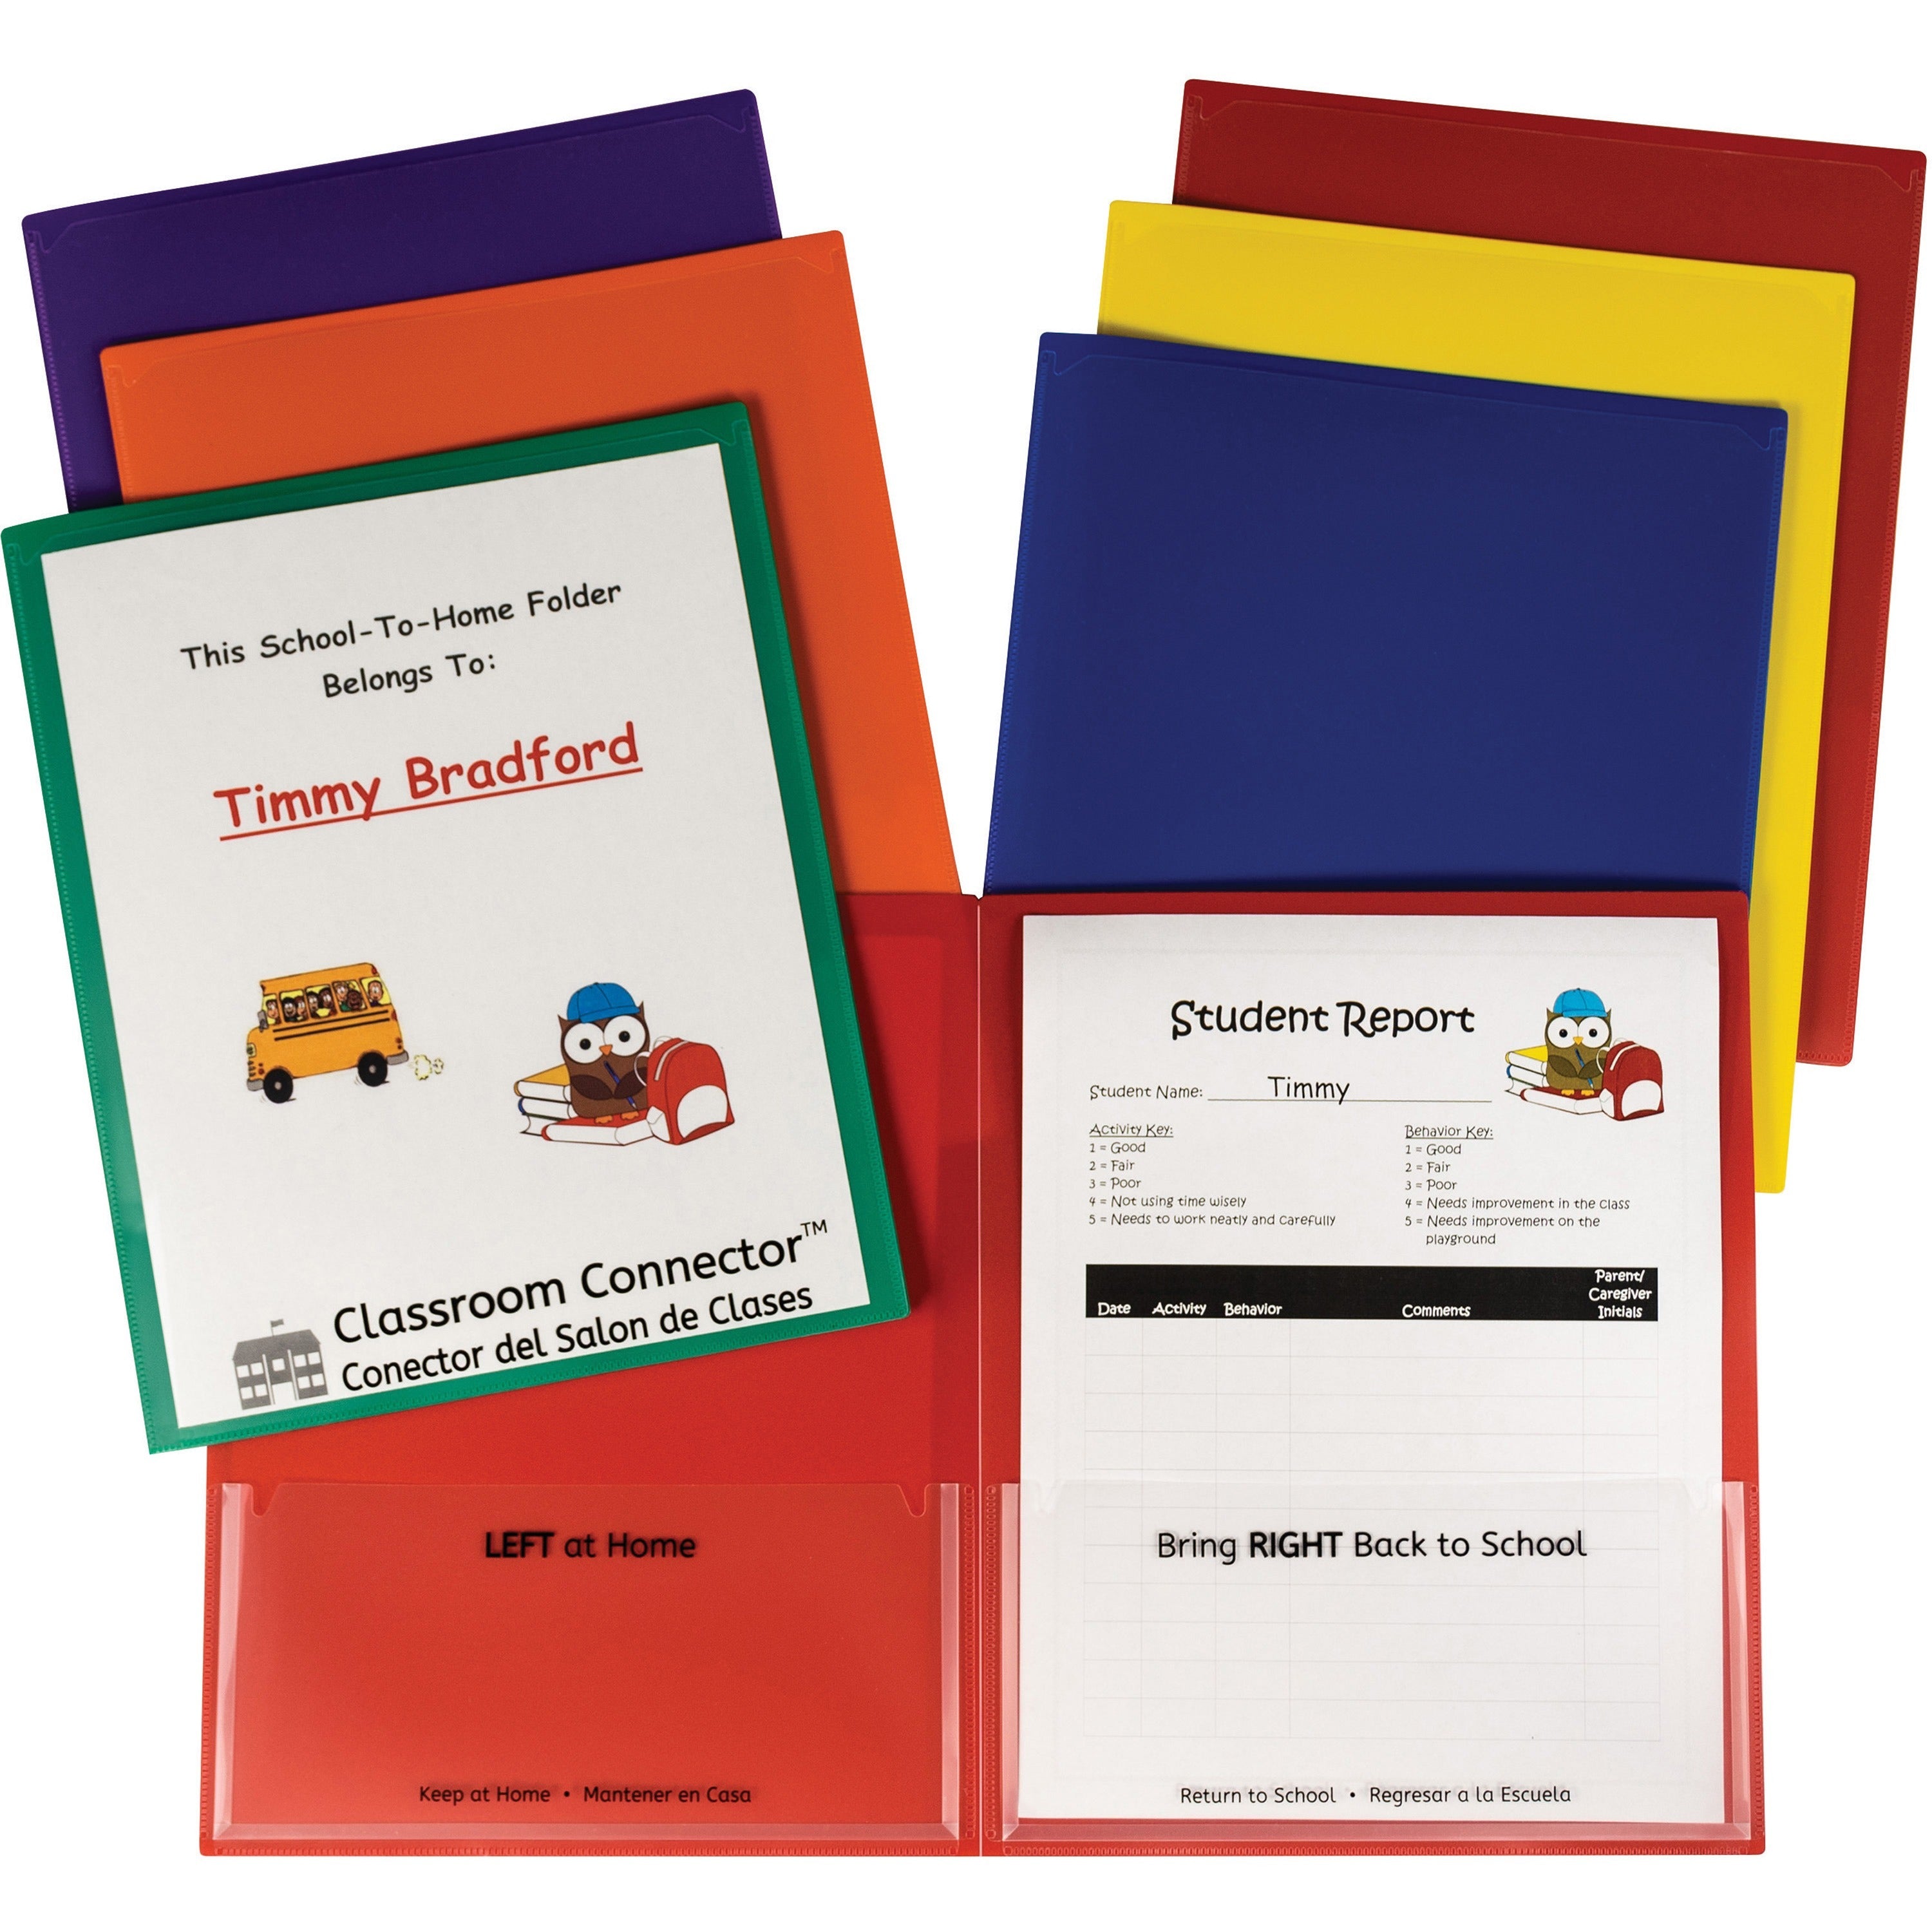 C-Line Classroom Connector Report Cover - 2 Front & Back Pocket(s) - Red, Orange, Yellow, Blue, Green, Purple - 36 / Box - 1